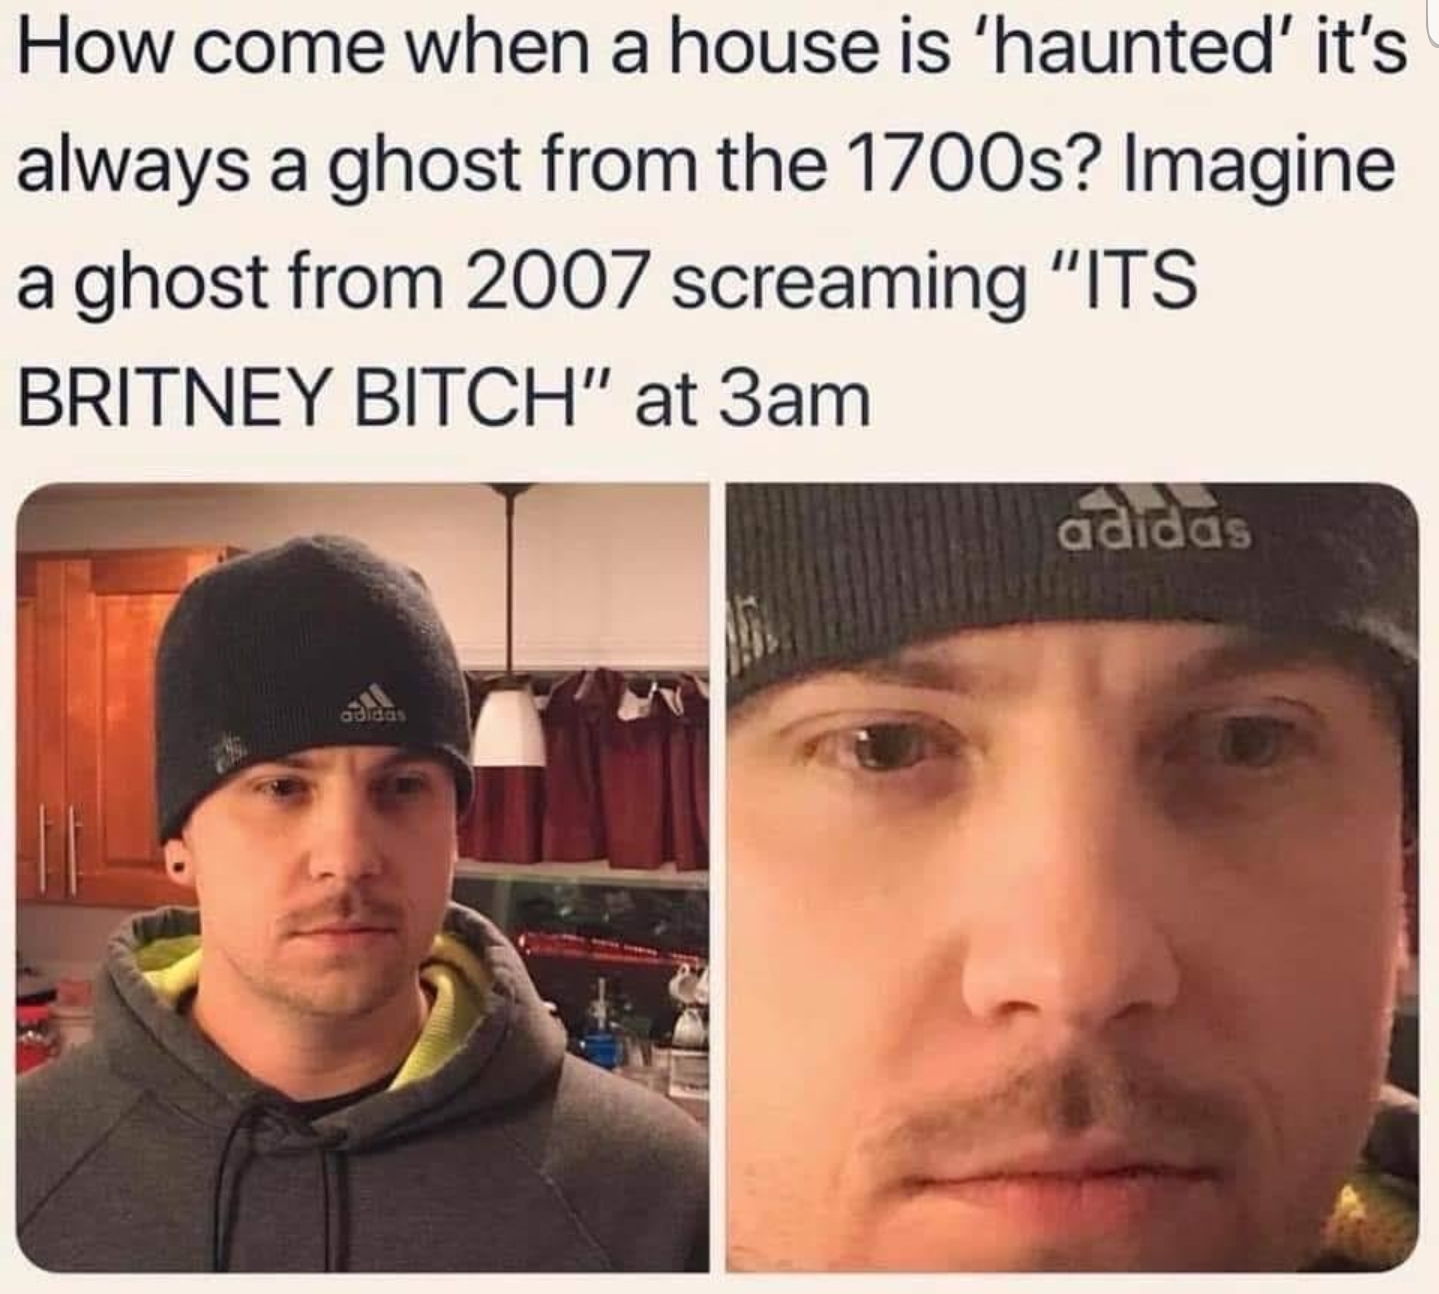 its britney bitch ghost meme - How come when a house is haunted' it's always a ghost from the 1700s? Imagine a ghost from 2007 screaming "Its Britney Bitch" at 3am adidas